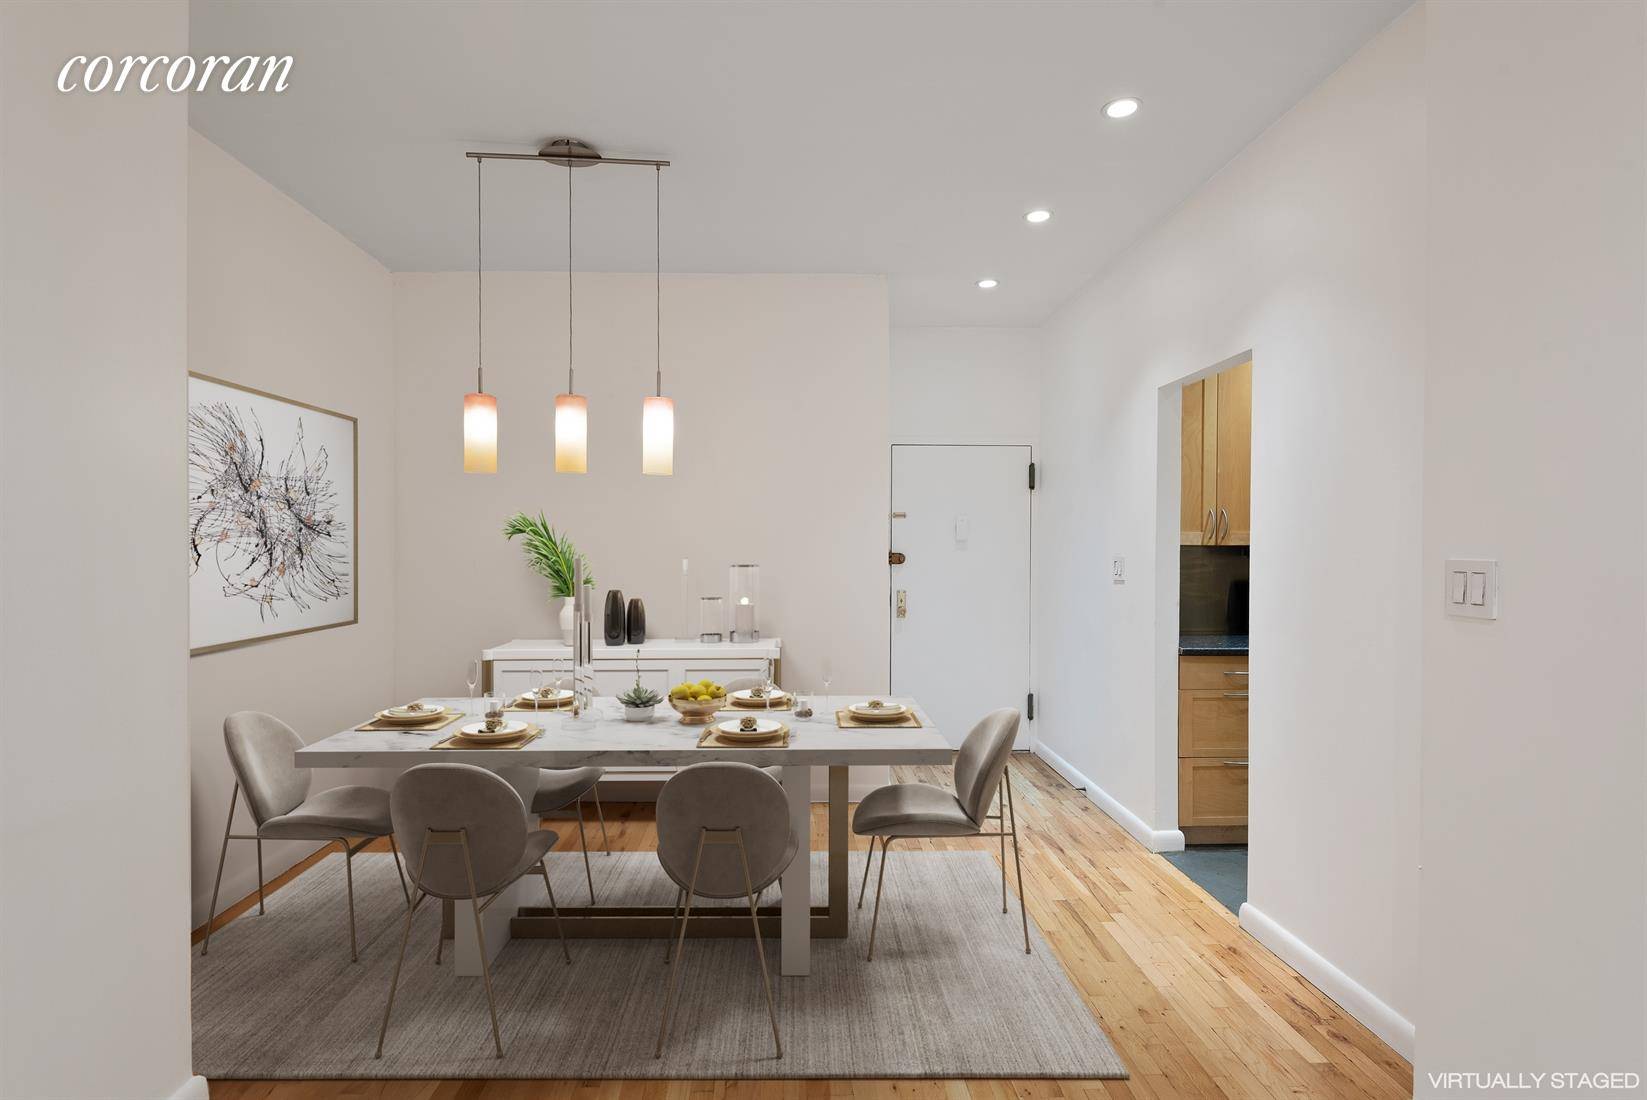 Apartment 6A is an amazing oversized one bedroom loft with private outdoor space located at 159 Madison Avenue, a favored Murray Hill prewar coop.